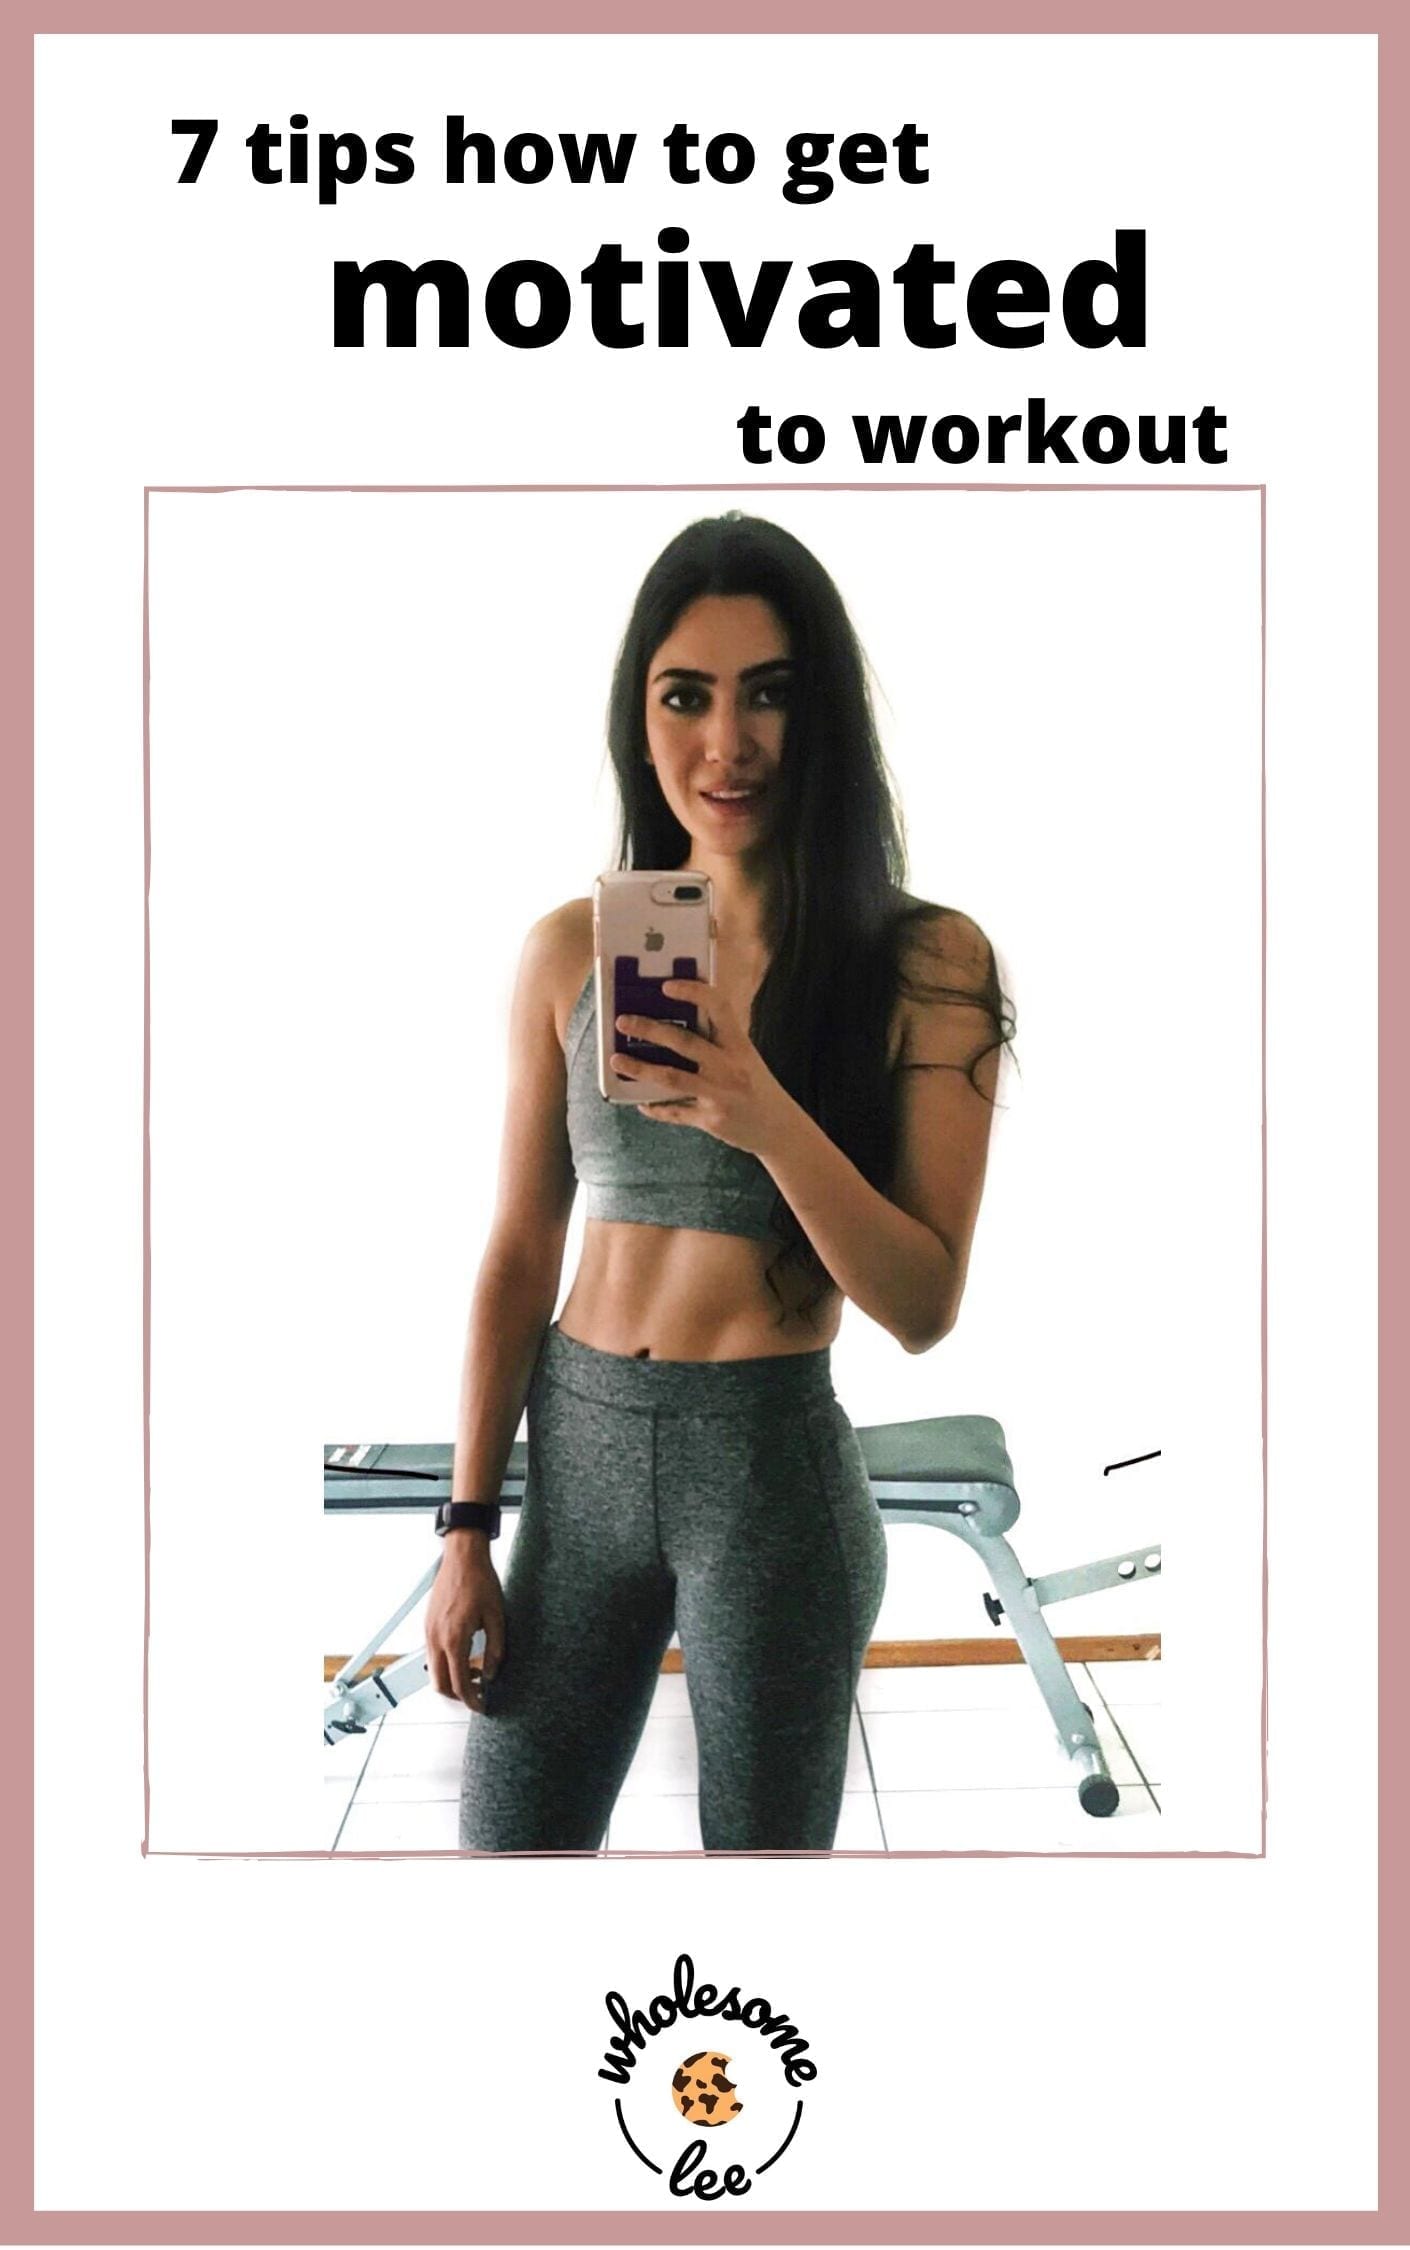 7 tips on how to get motivated to workout